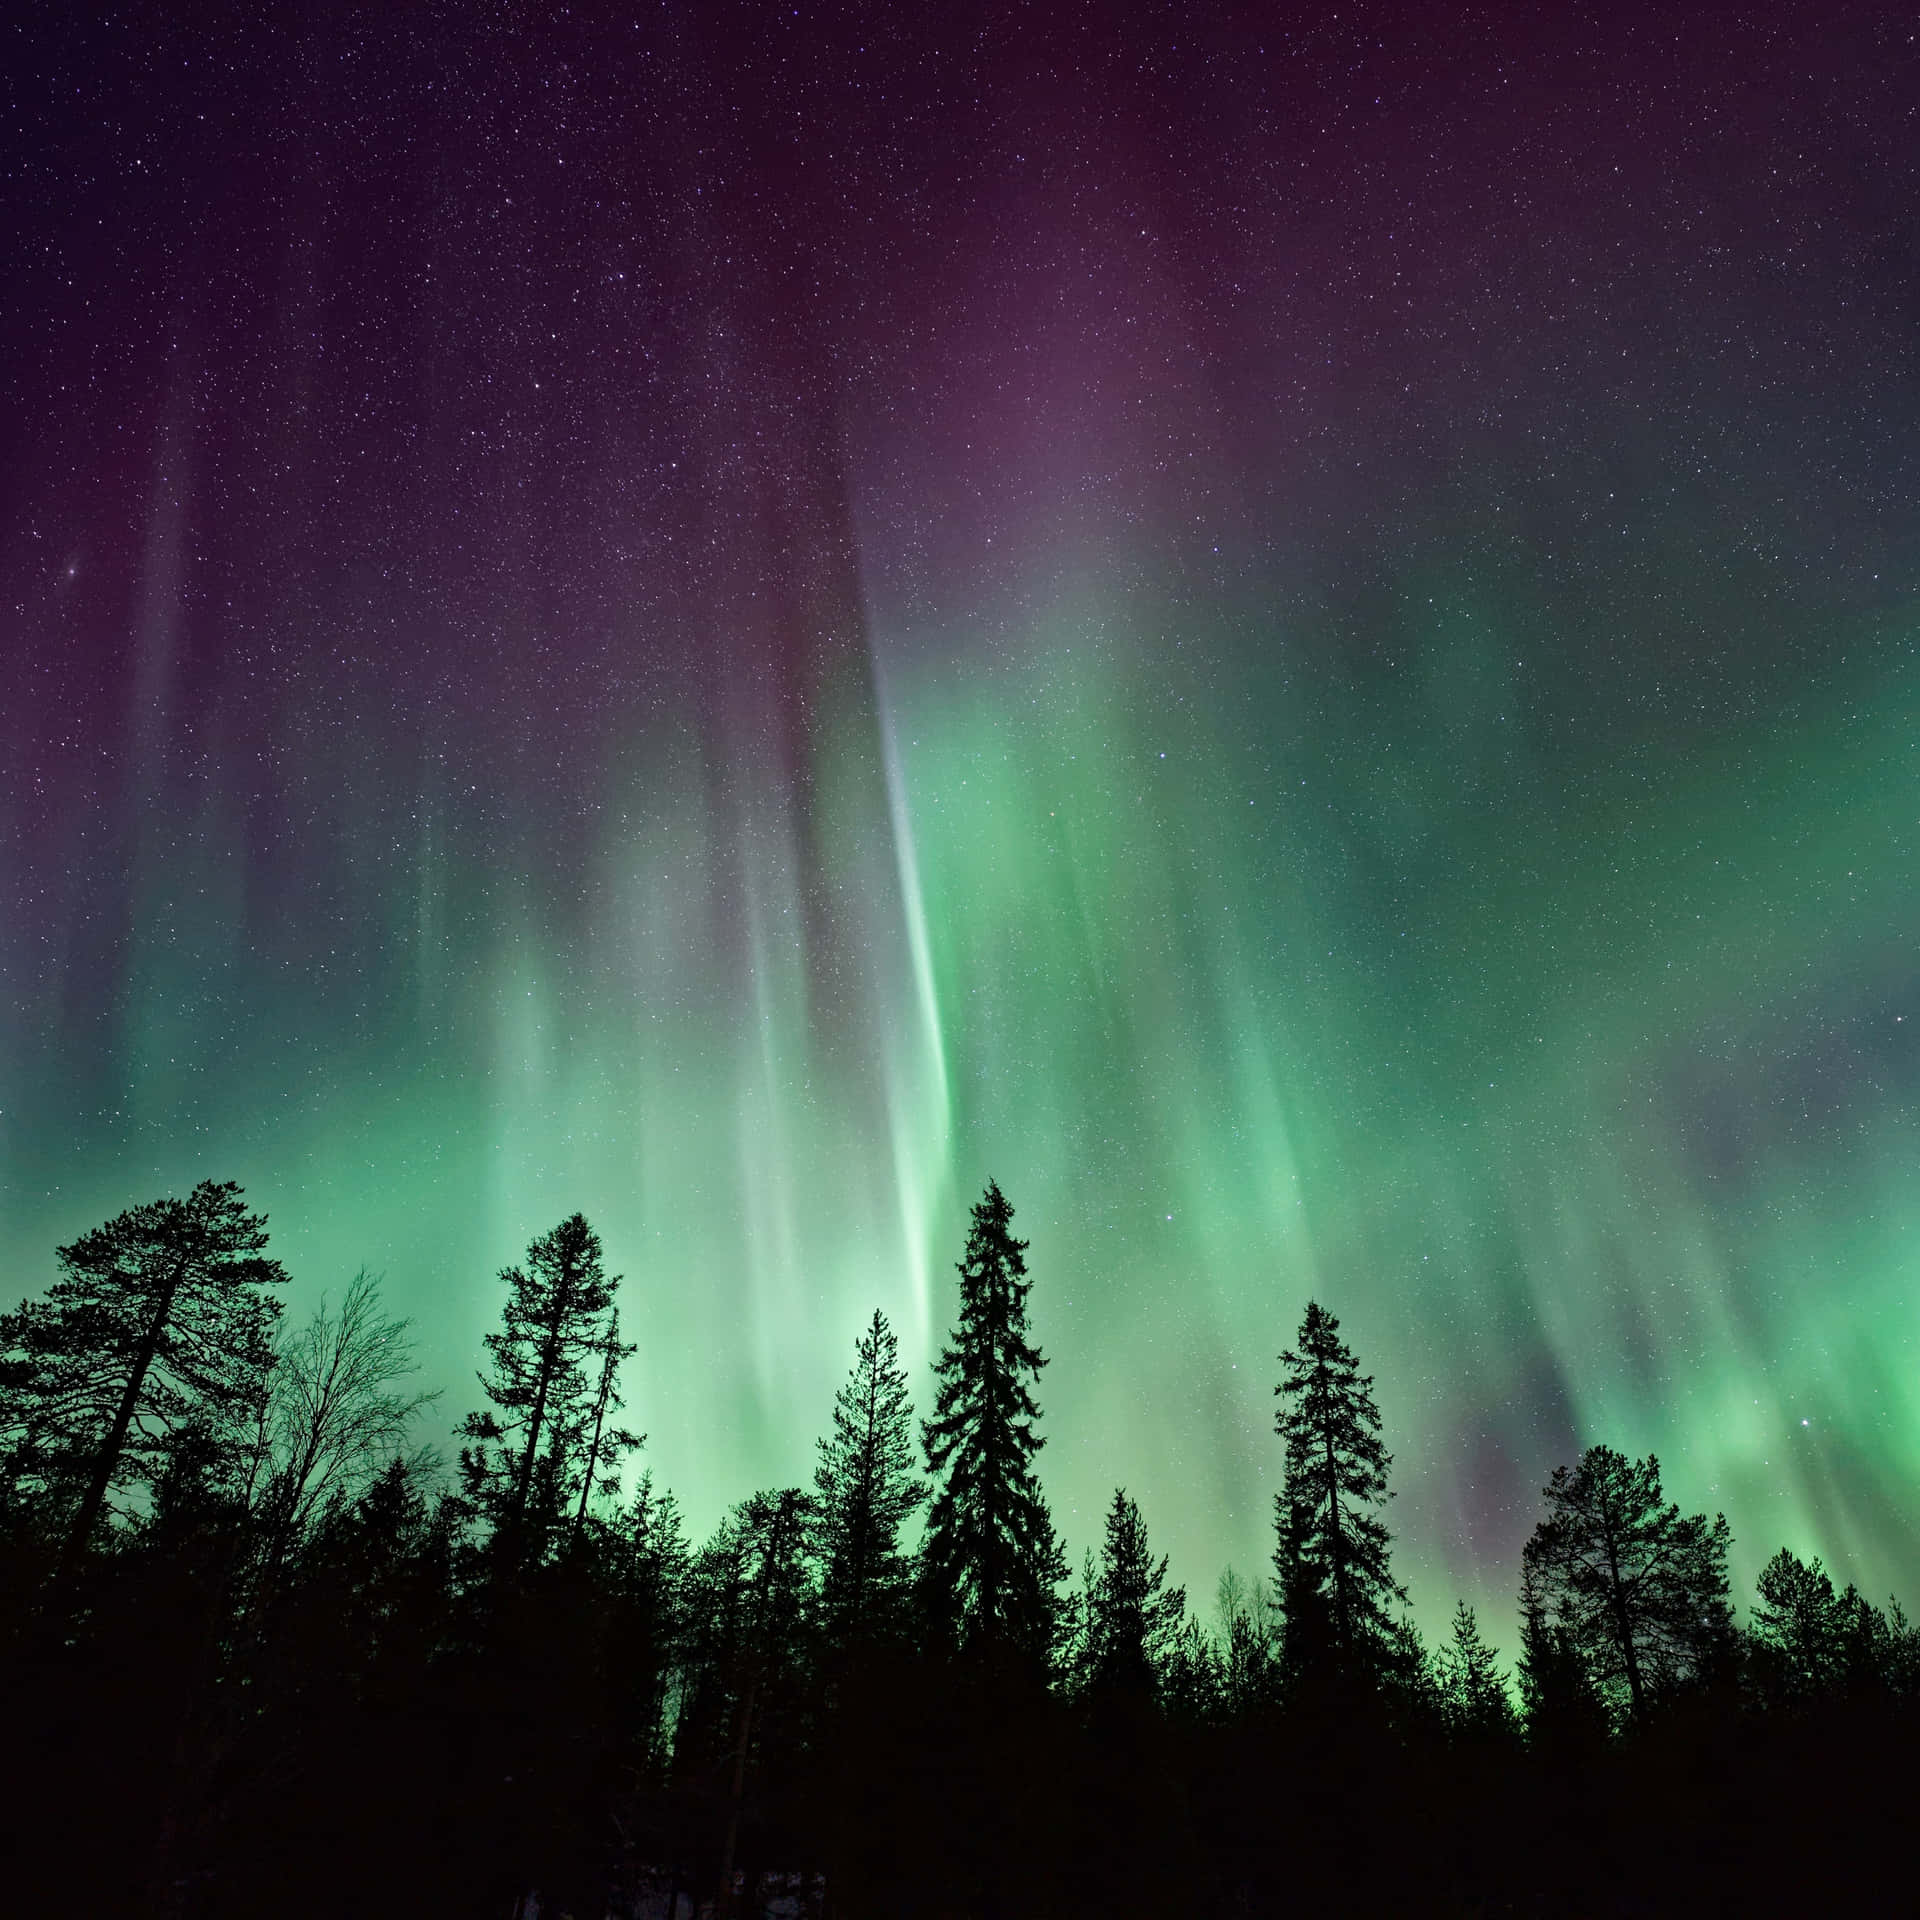 The Aurora Borealis Is Seen Over A Forest Wallpaper